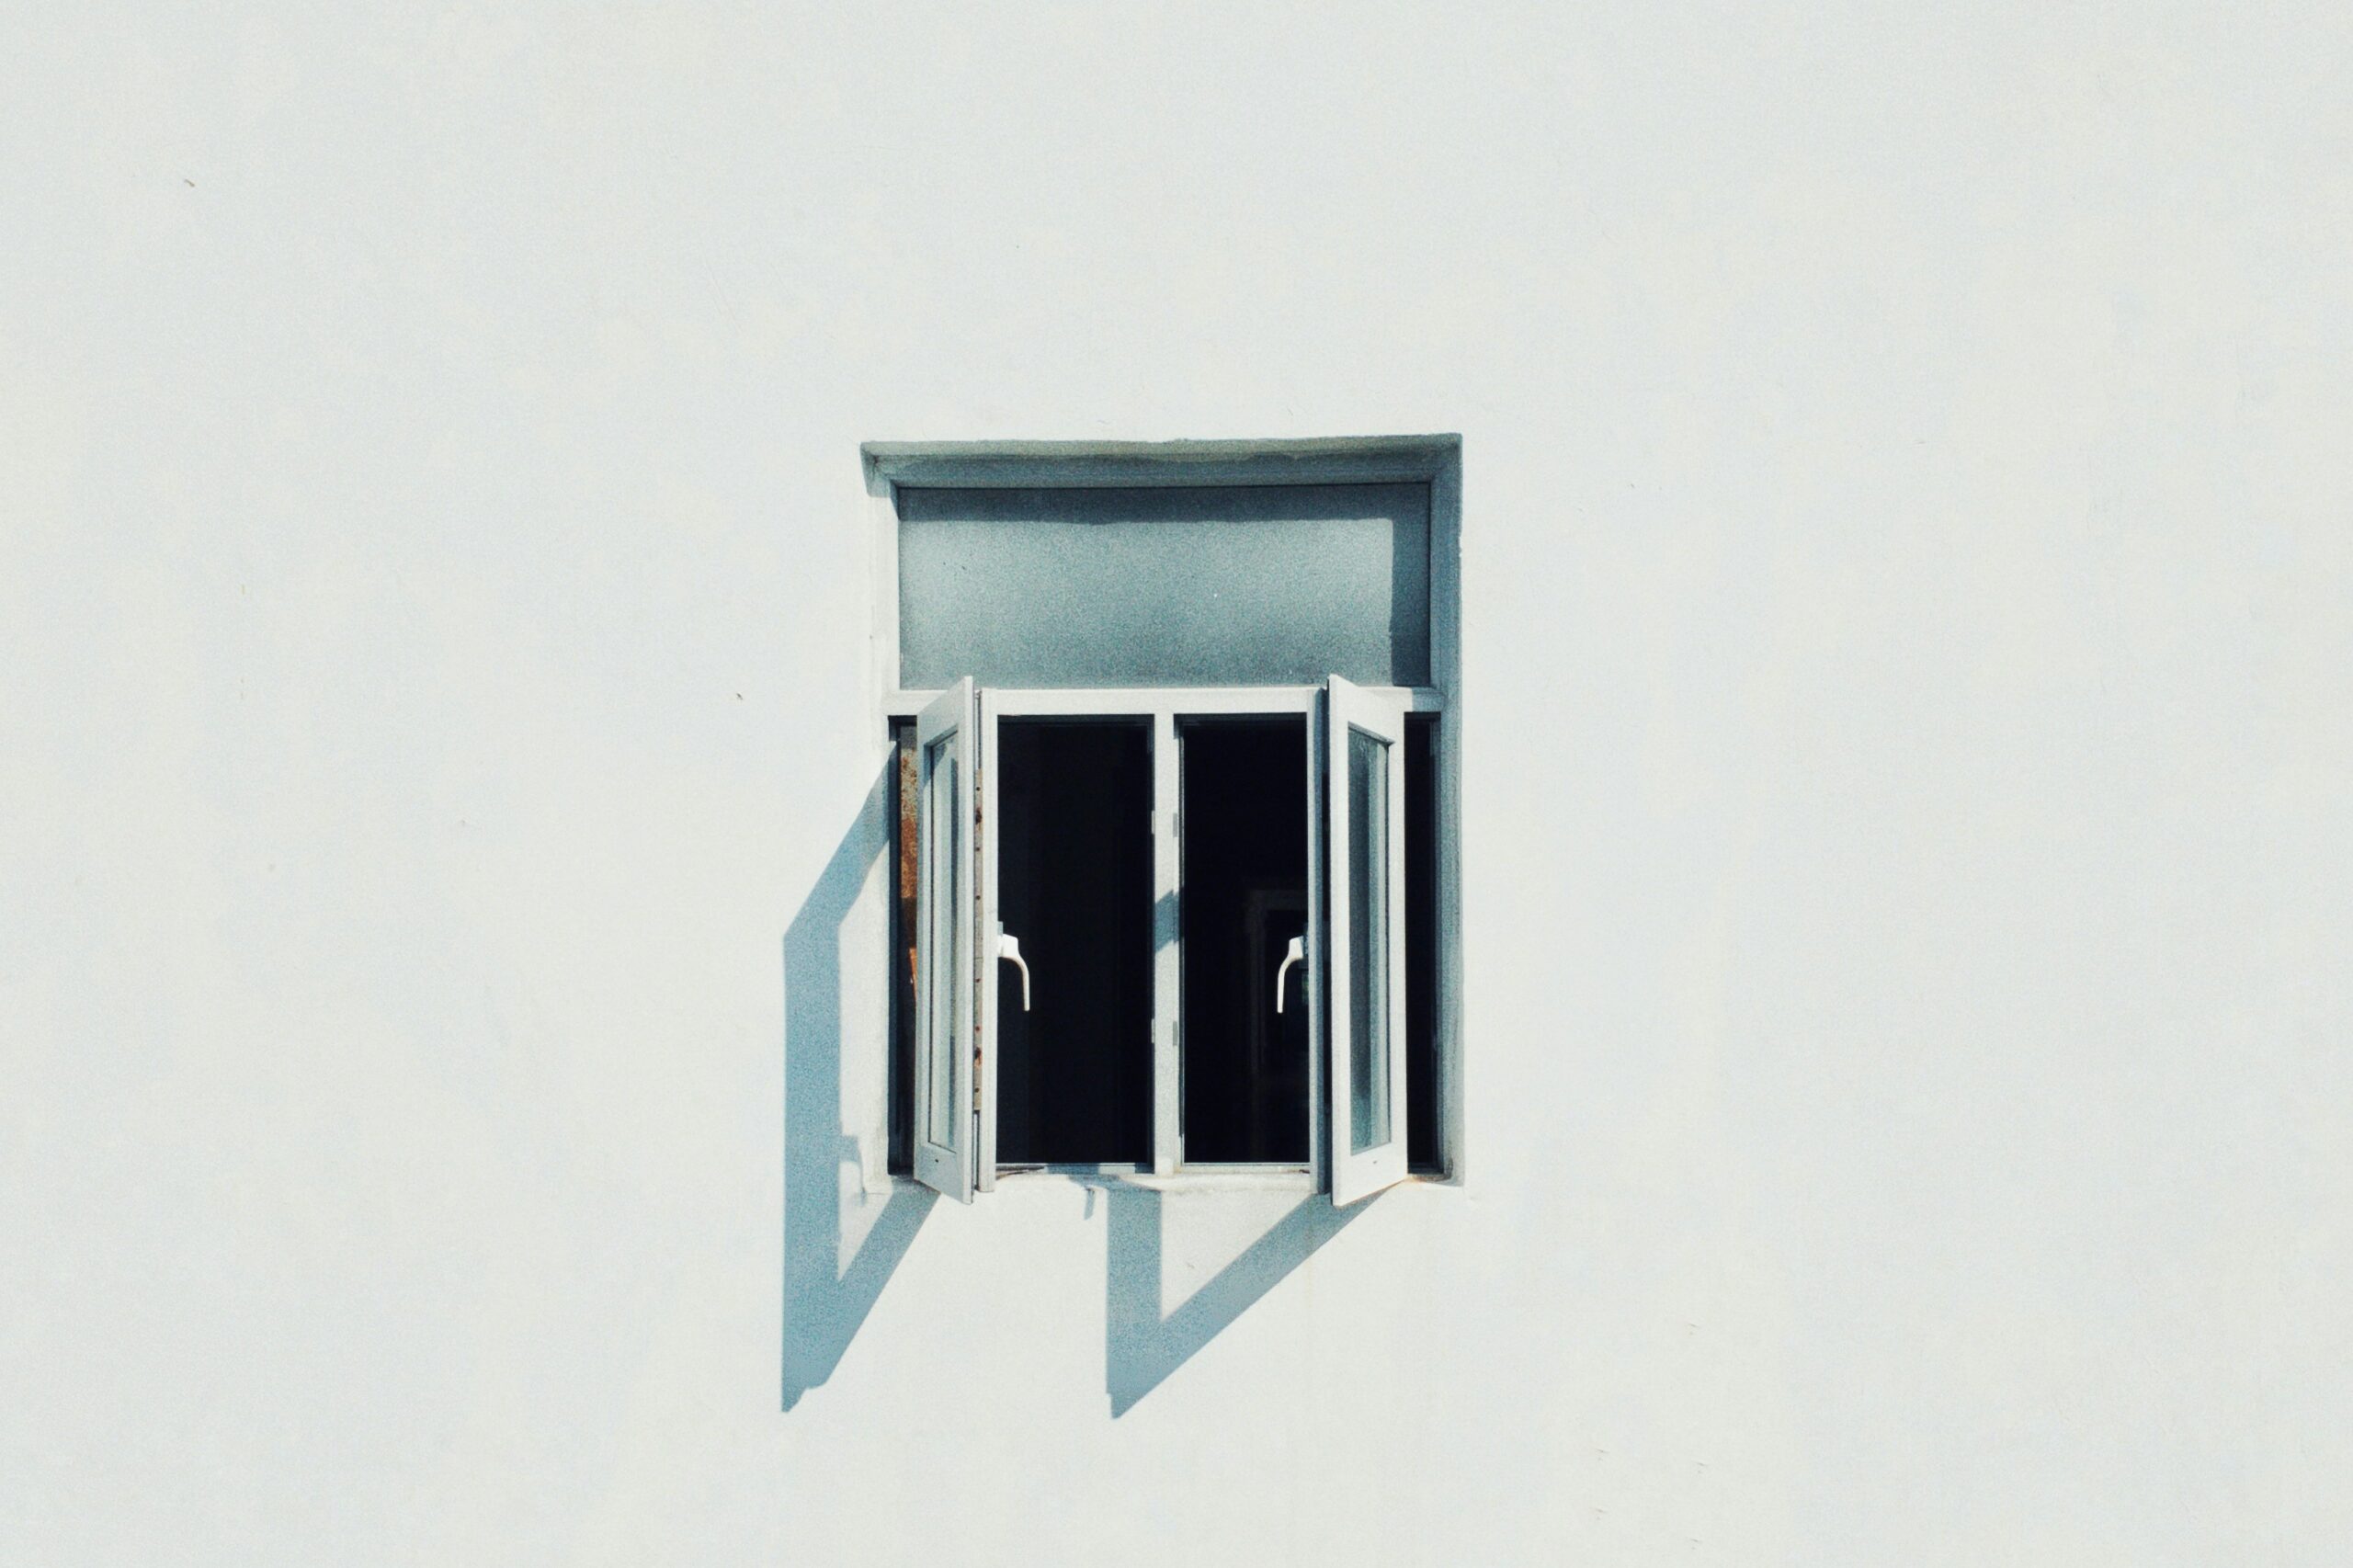 An open window on a white building